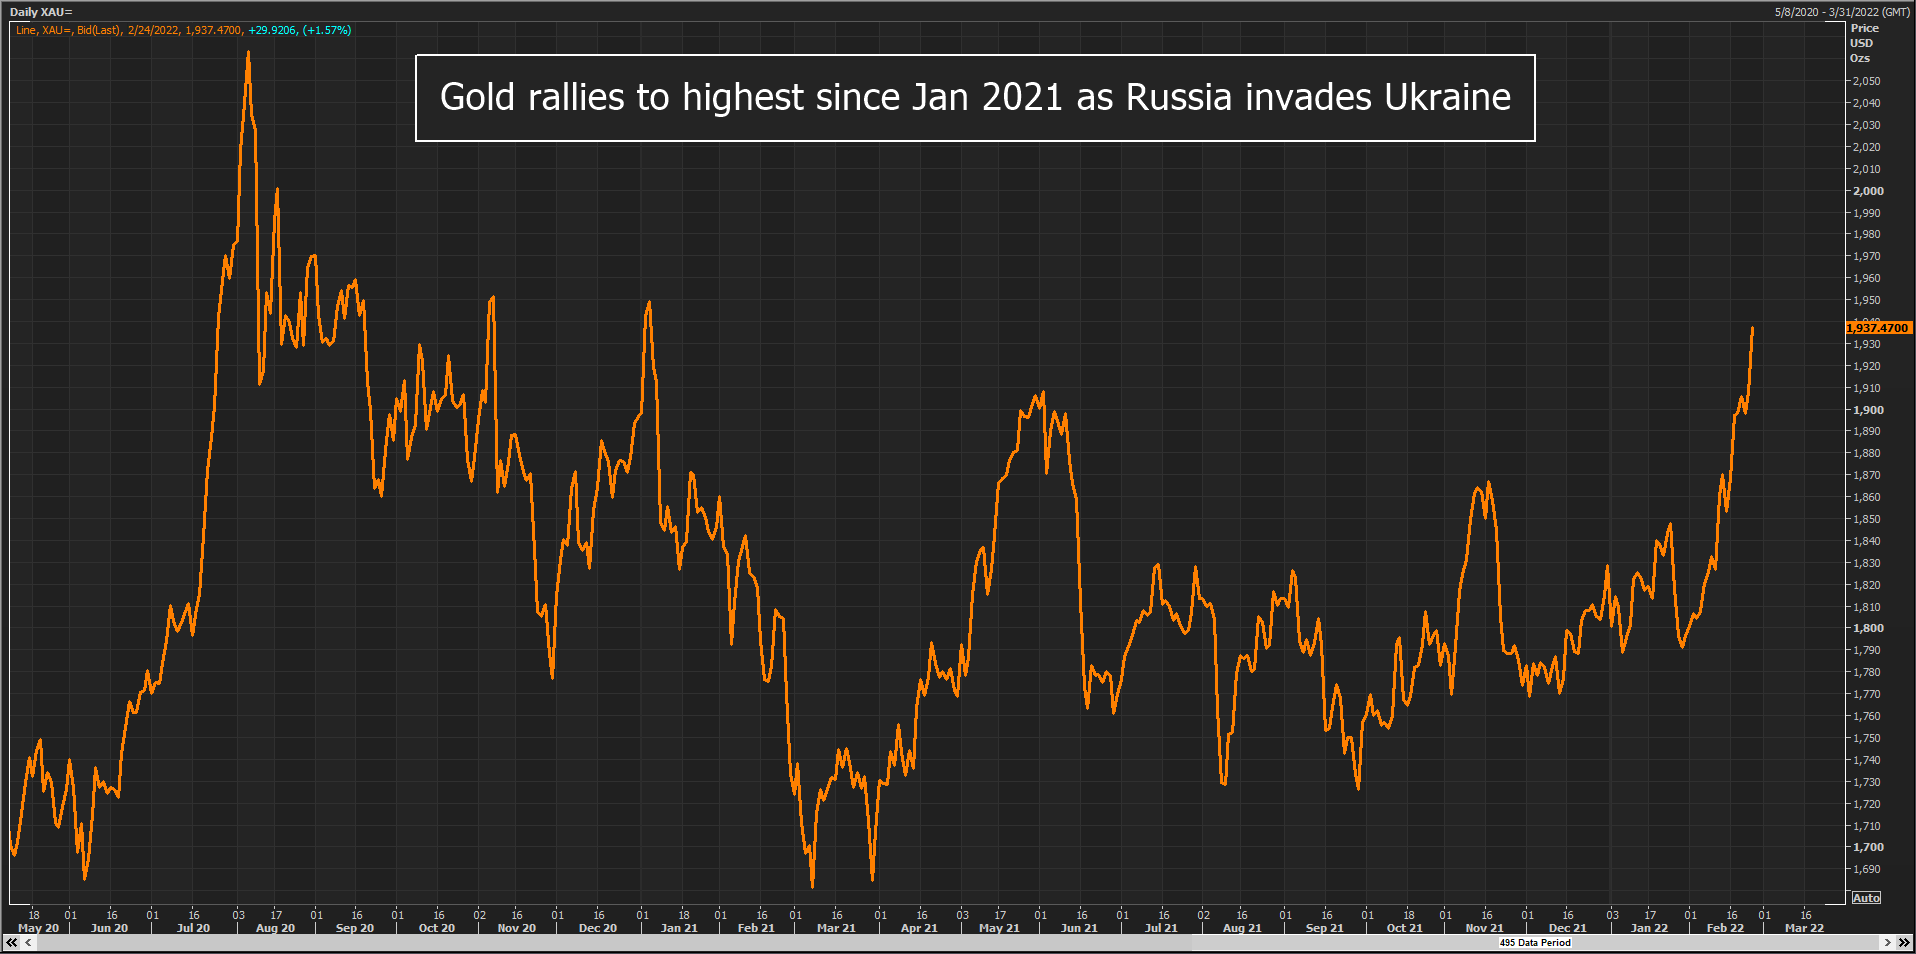 Gold rallies as Russia invades Ukraine